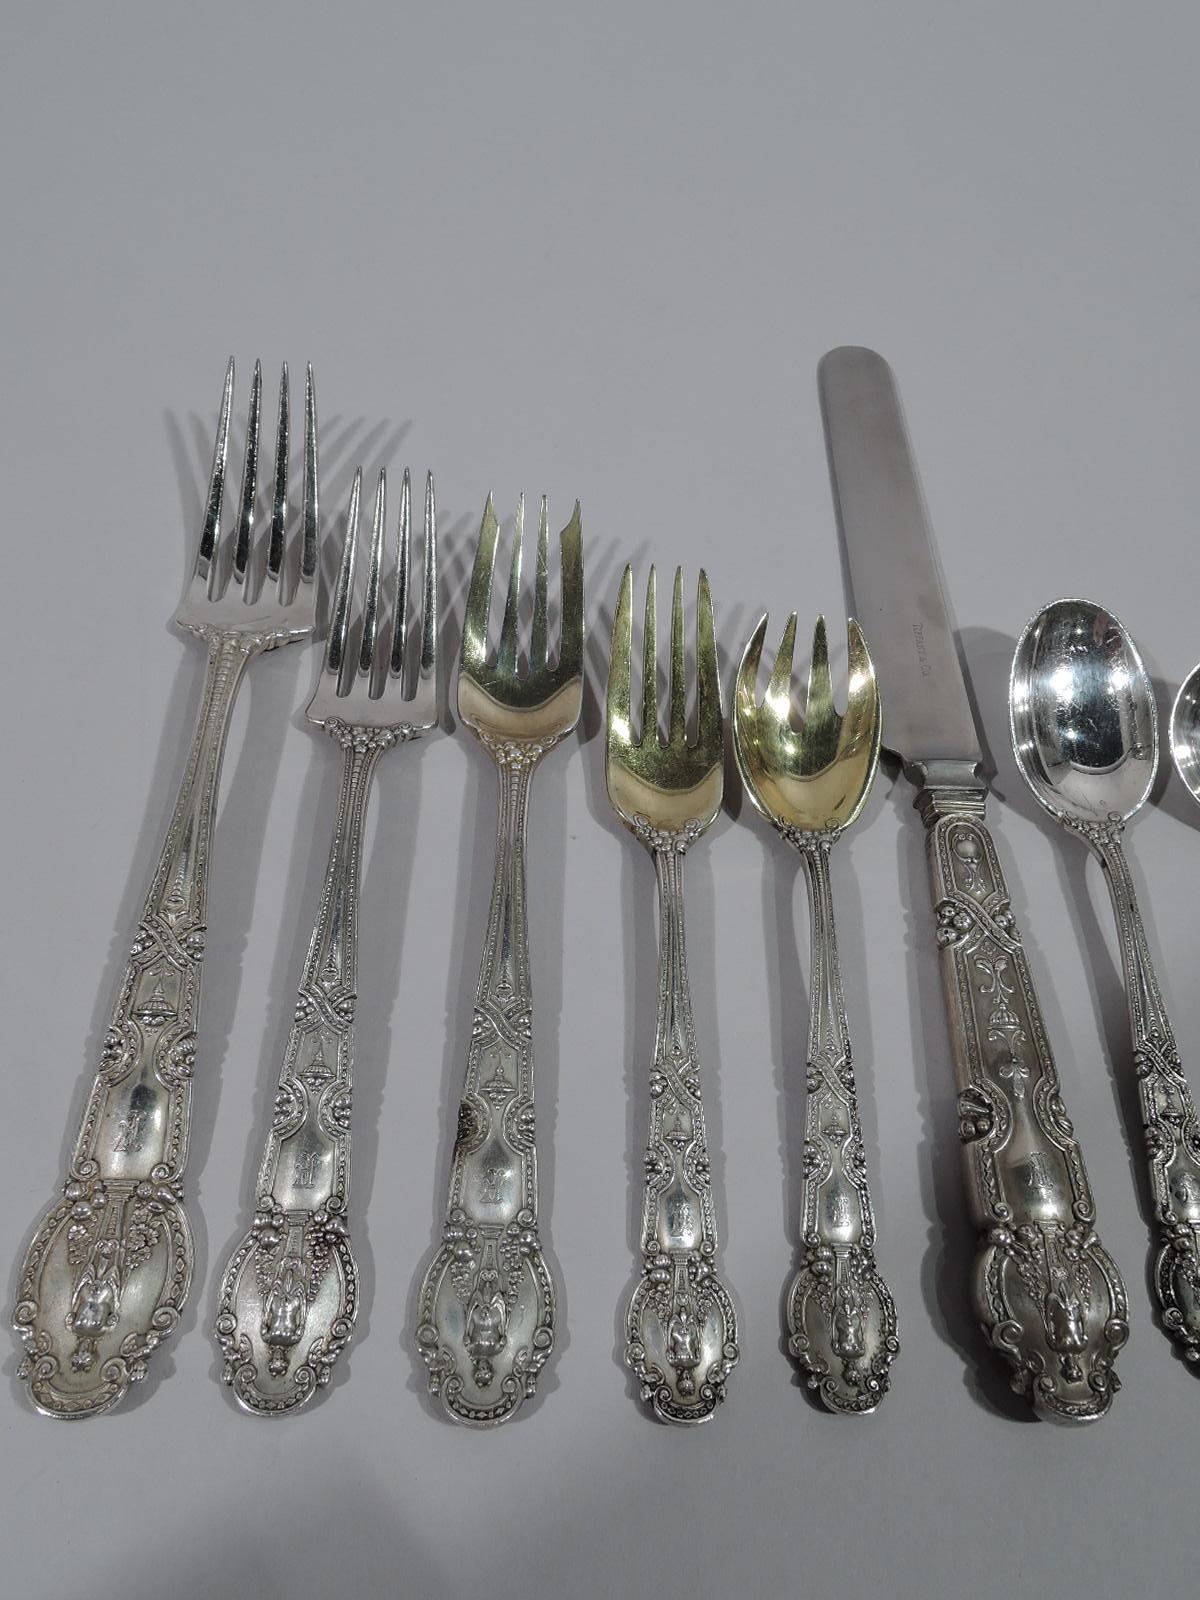 Sterling silver dinner and lunch service in desirable Renaissance pattern. Made by Tiffany & Co. in New York, circa 1920.

This set comprises 12 place settings with 170 pieces (dimensions in inches): Forks: 12 dinner forks (9), 12 luncheon forks